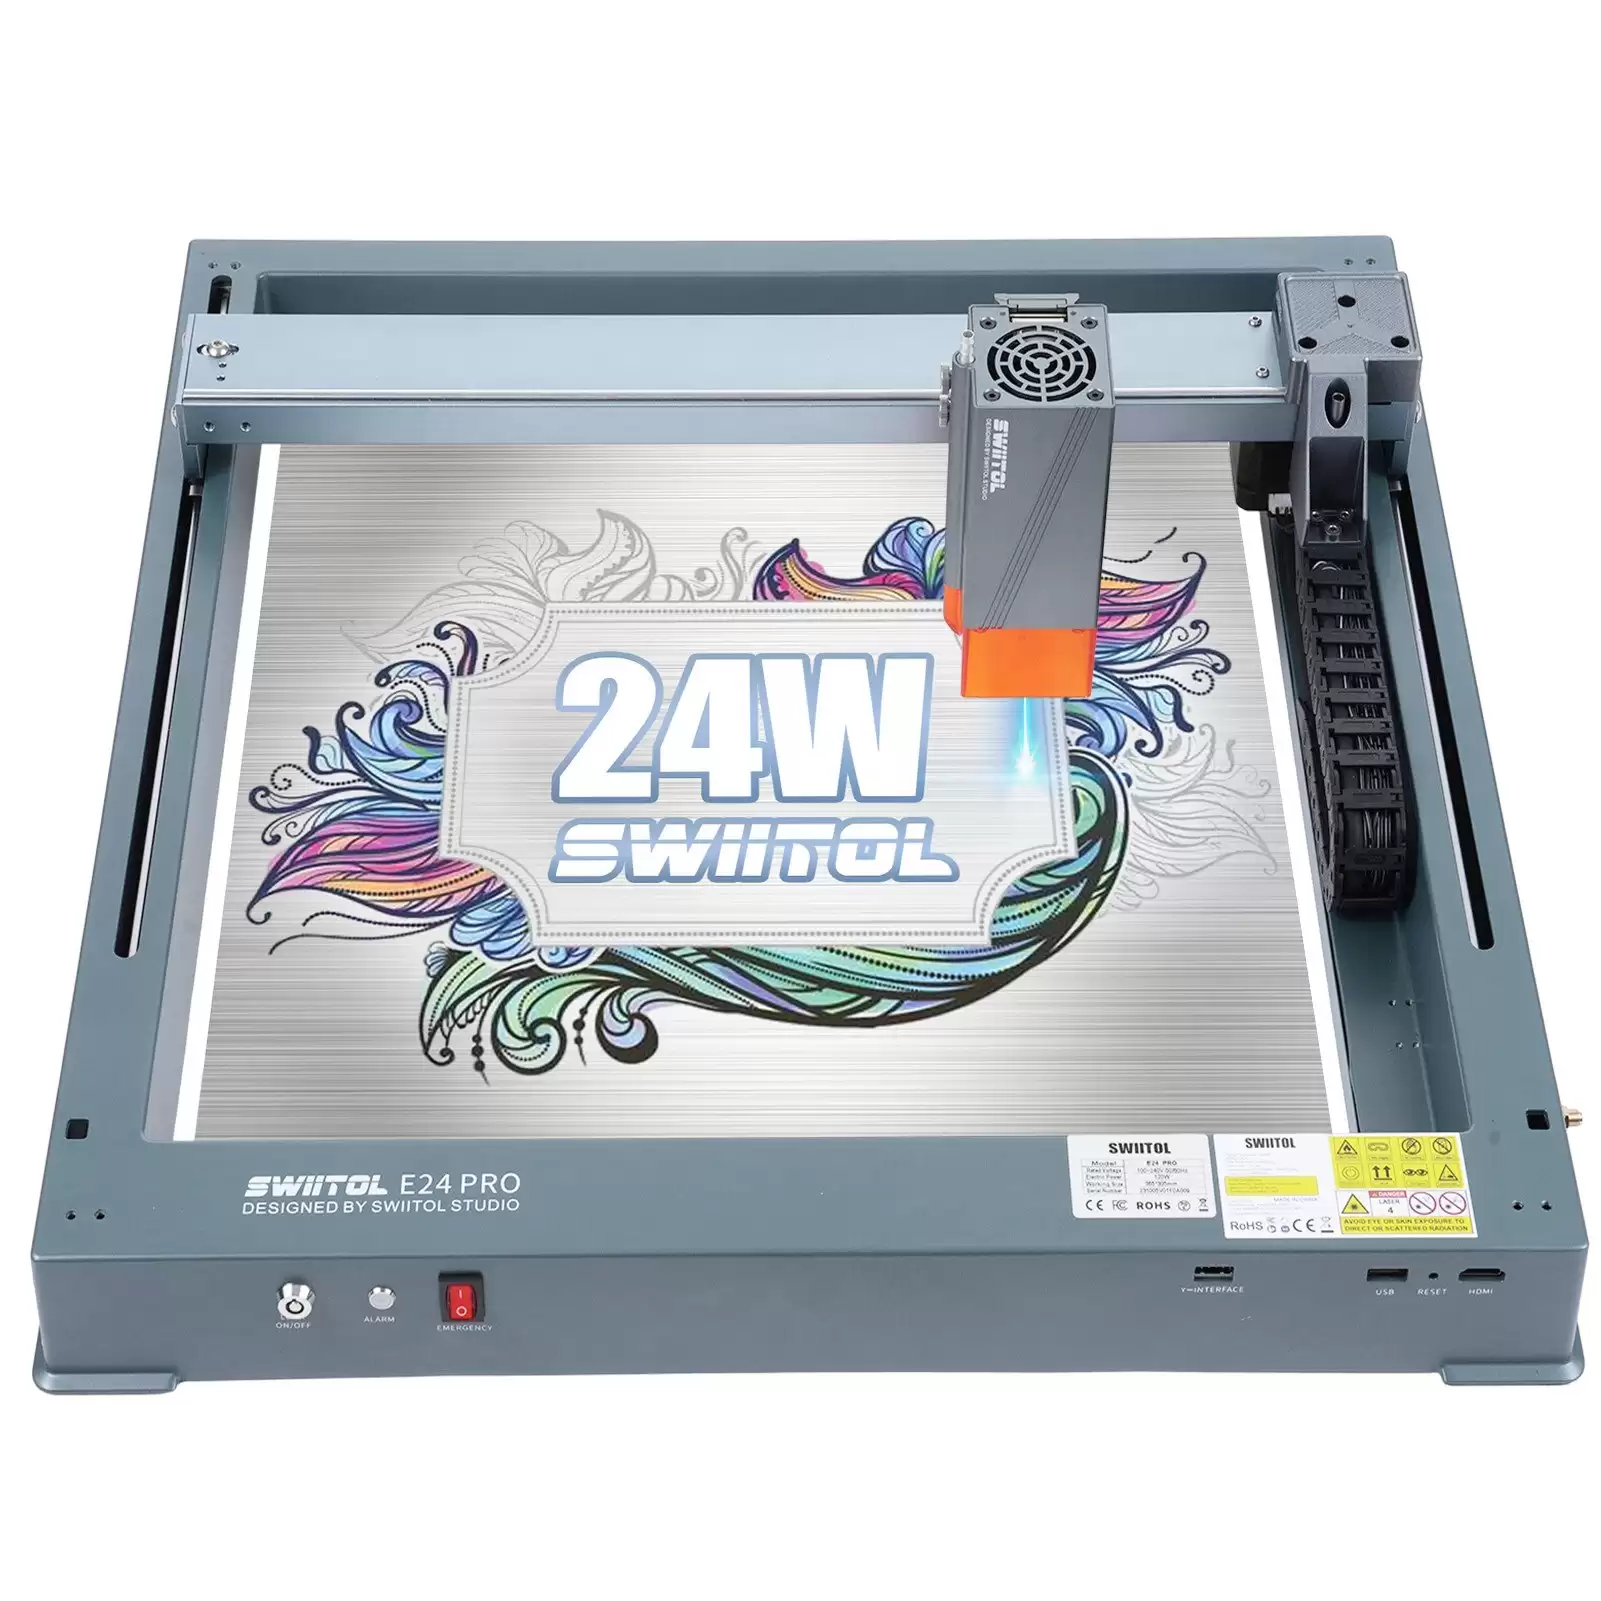 Order In Just €489 Swiitol E24 Pro 24w Integrated Structure Laser Engraver With This Discount Coupon At Cafago